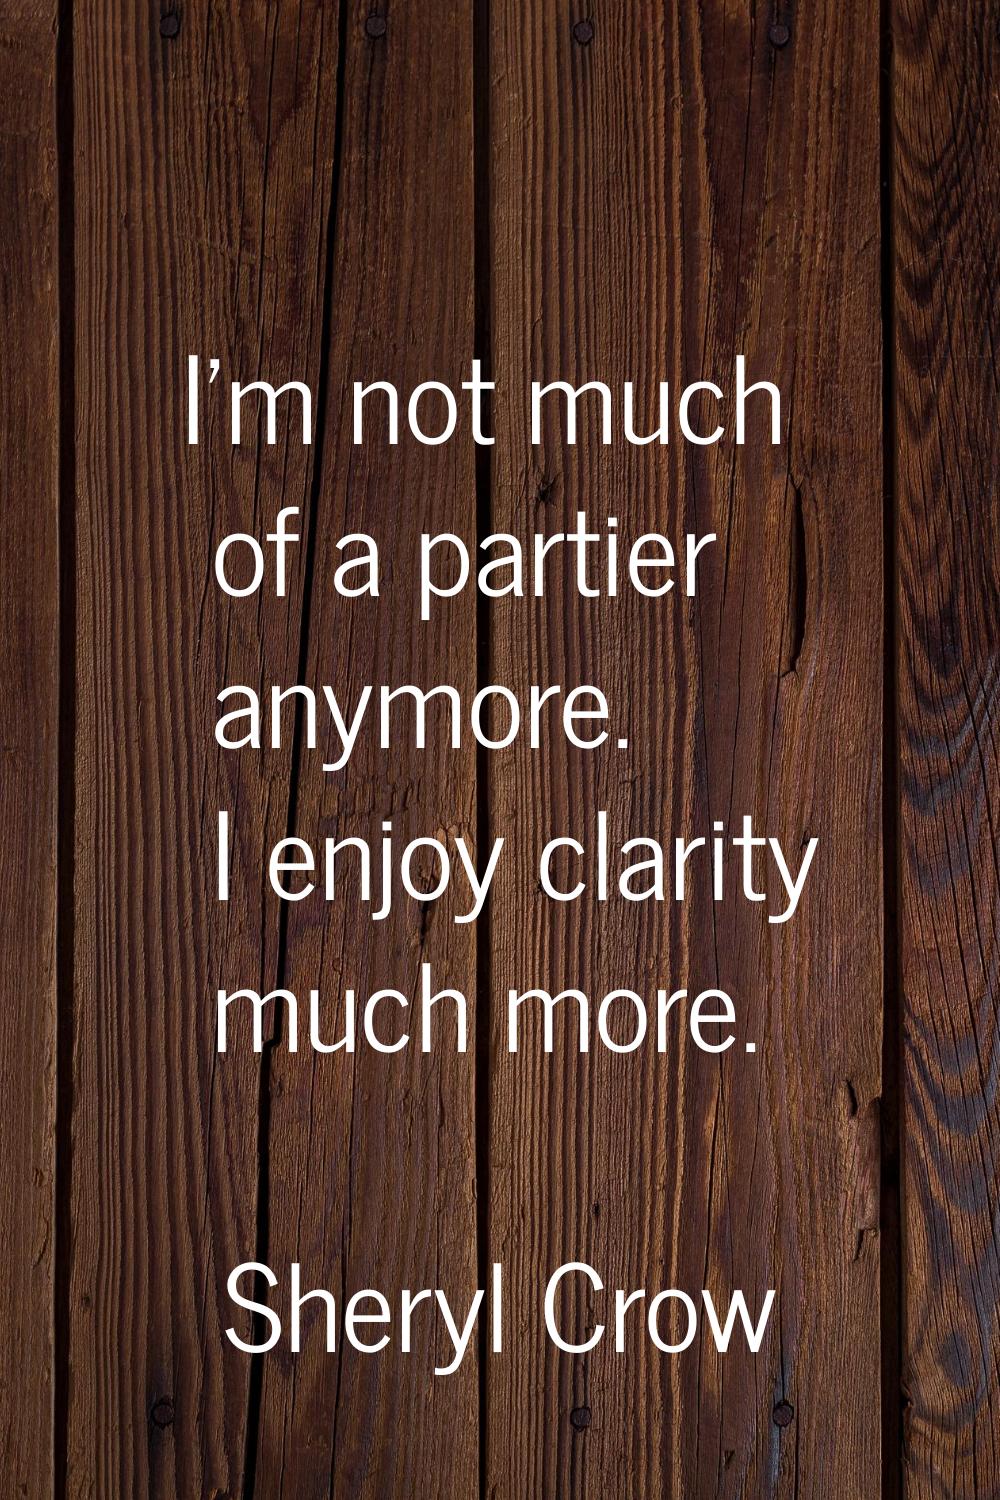 I'm not much of a partier anymore. I enjoy clarity much more.